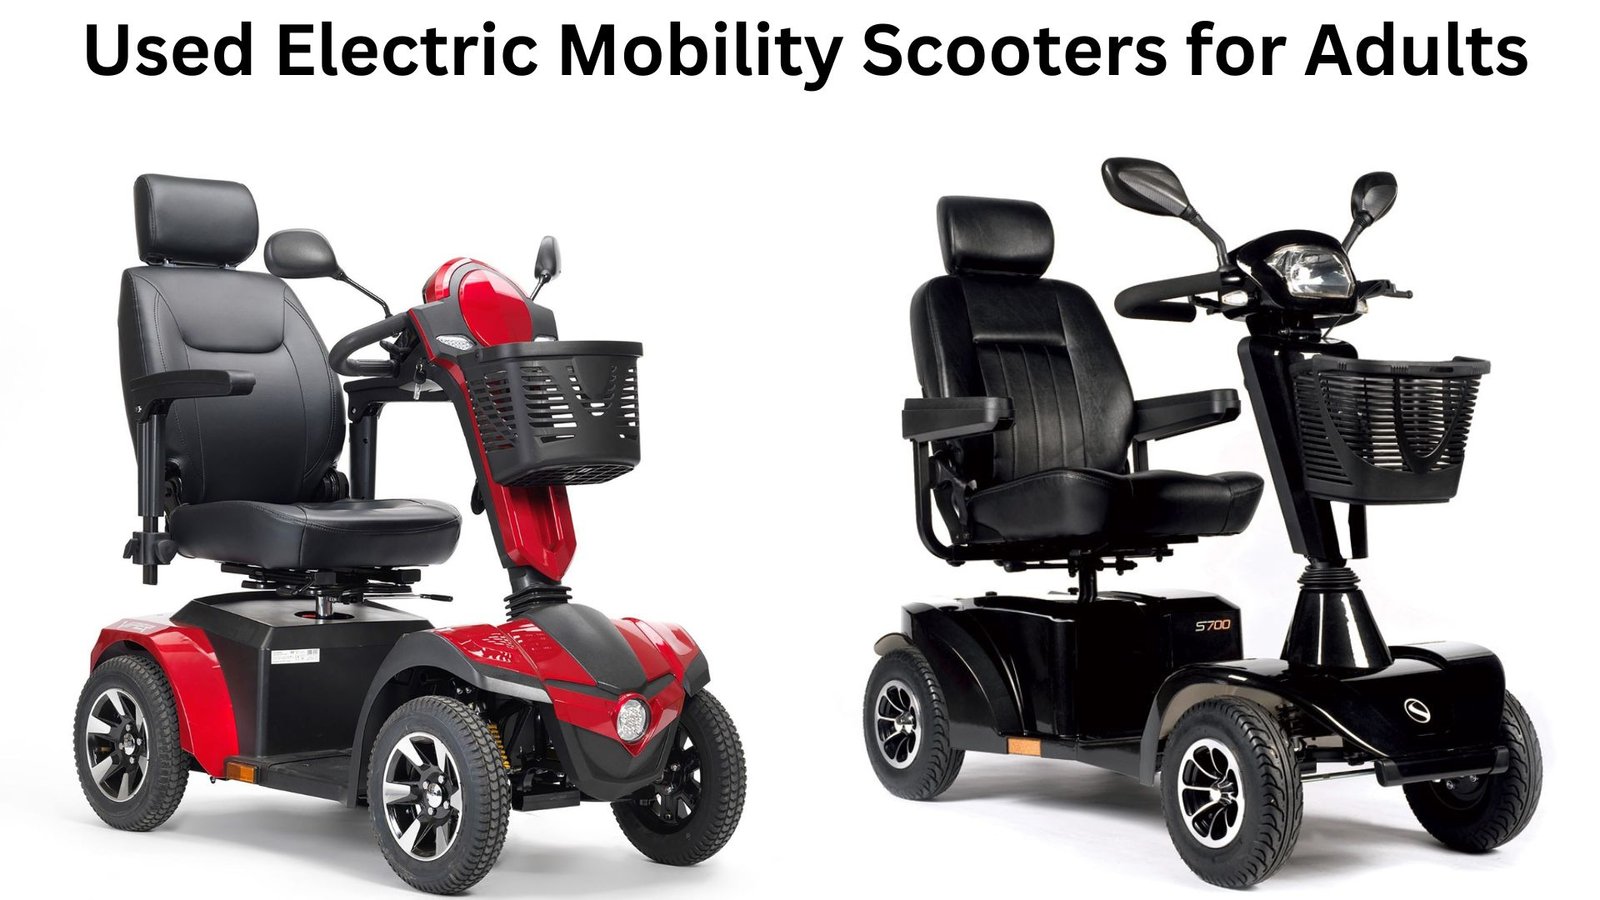 Used Electric Mobility Scooters for Adults